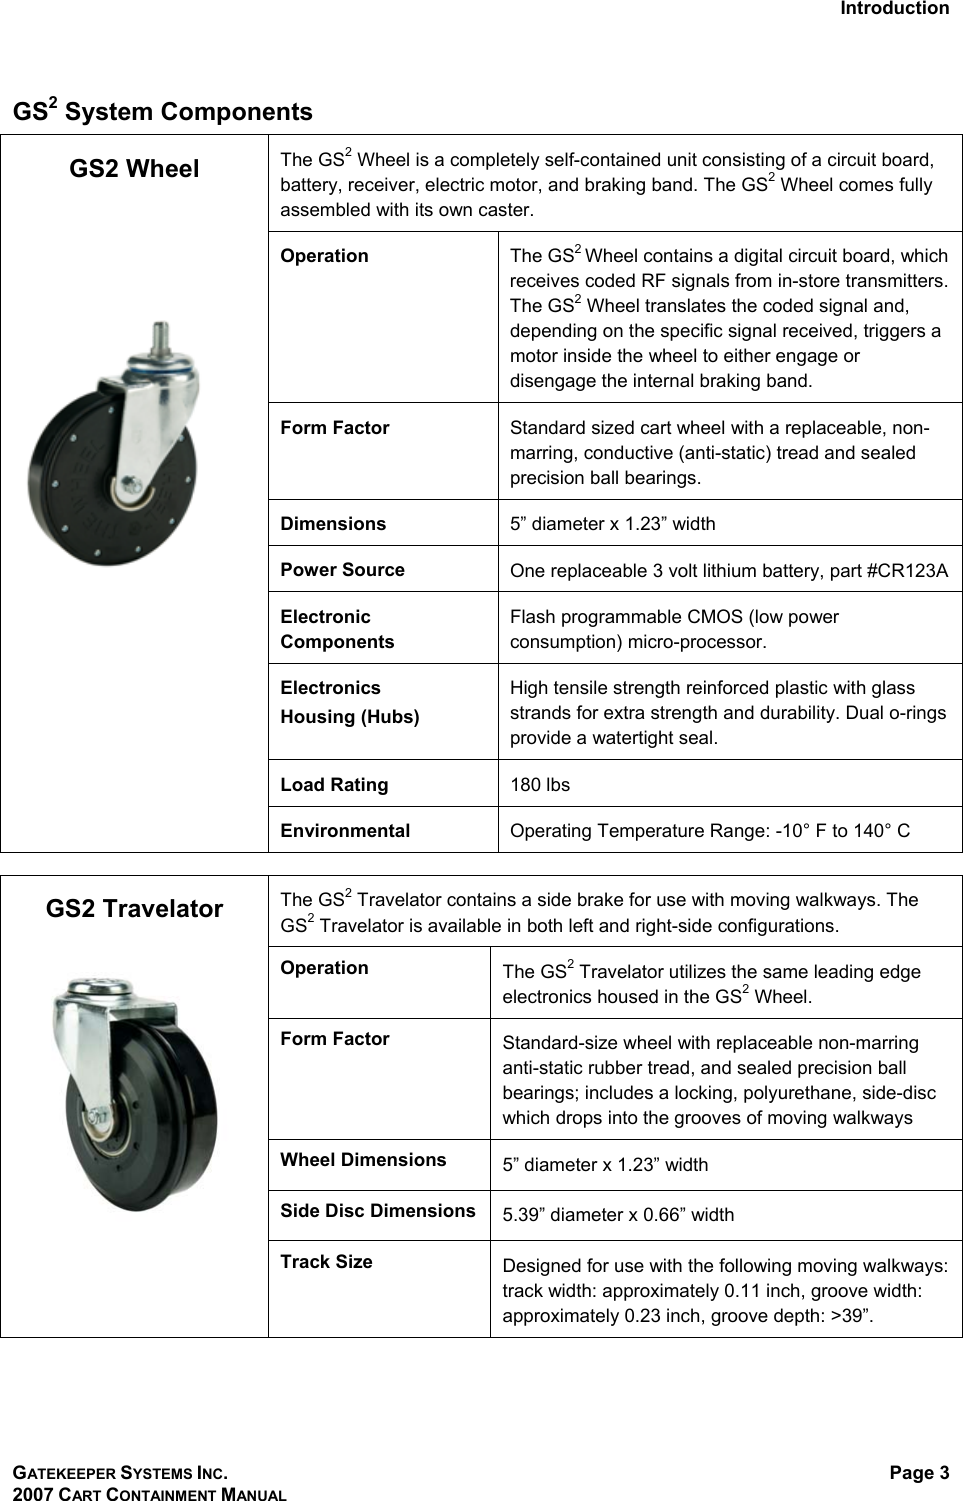 Introduction GATEKEEPER SYSTEMS INC. 2007 CART CONTAINMENT MANUAL Page 3  GS2 System Components  The GS2 Wheel is a completely self-contained unit consisting of a circuit board, battery, receiver, electric motor, and braking band. The GS2 Wheel comes fully assembled with its own caster.  Operation  The GS2 Wheel contains a digital circuit board, which receives coded RF signals from in-store transmitters. The GS2 Wheel translates the coded signal and, depending on the specific signal received, triggers a motor inside the wheel to either engage or disengage the internal braking band. Form Factor  Standard sized cart wheel with a replaceable, non-marring, conductive (anti-static) tread and sealed precision ball bearings. Dimensions  5” diameter x 1.23” width Power Source  One replaceable 3 volt lithium battery, part #CR123A Electronic Components Flash programmable CMOS (low power consumption) micro-processor.  Electronics  Housing (Hubs) High tensile strength reinforced plastic with glass strands for extra strength and durability. Dual o-rings provide a watertight seal. Load Rating  180 lbs GS2 Wheel        Environmental  Operating Temperature Range: -10° F to 140° C  The GS2 Travelator contains a side brake for use with moving walkways. The GS2 Travelator is available in both left and right-side configurations. Operation The GS2 Travelator utilizes the same leading edge electronics housed in the GS2 Wheel. Form Factor Standard-size wheel with replaceable non-marring anti-static rubber tread, and sealed precision ball bearings; includes a locking, polyurethane, side-disc which drops into the grooves of moving walkways Wheel Dimensions 5” diameter x 1.23” width Side Disc Dimensions 5.39” diameter x 0.66” width GS2 Travelator  Track Size Designed for use with the following moving walkways: track width: approximately 0.11 inch, groove width: approximately 0.23 inch, groove depth: &gt;39”.  